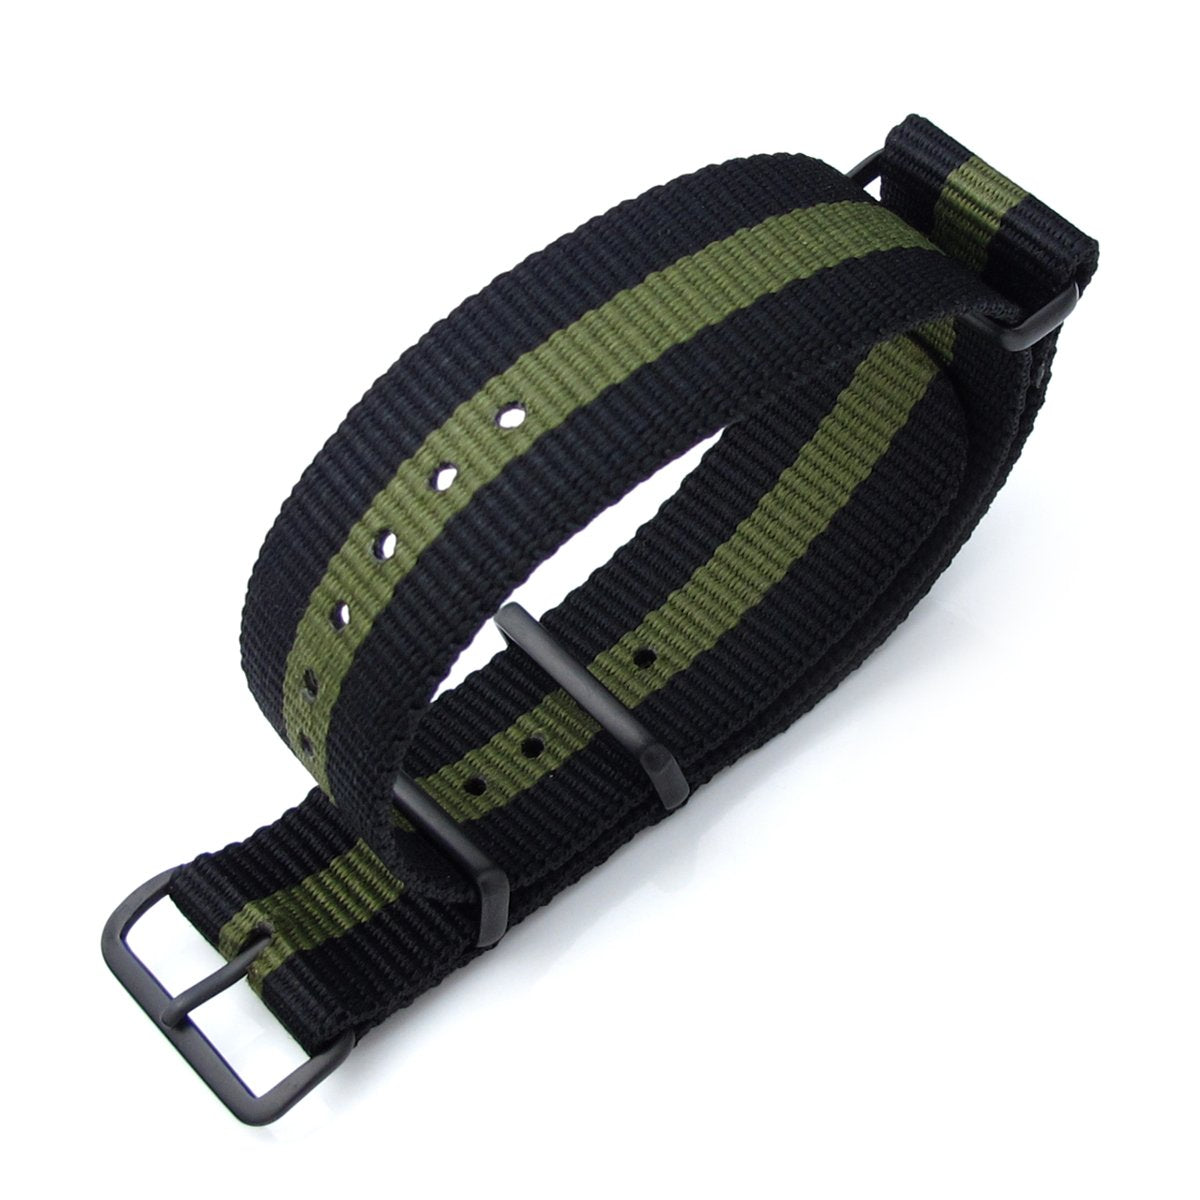 MiLTAT 21mm or 22mm G10 NATO Military Watch Strap Ballistic Nylon Armband PVD Black Black &amp; Military Green Strapcode Watch Bands